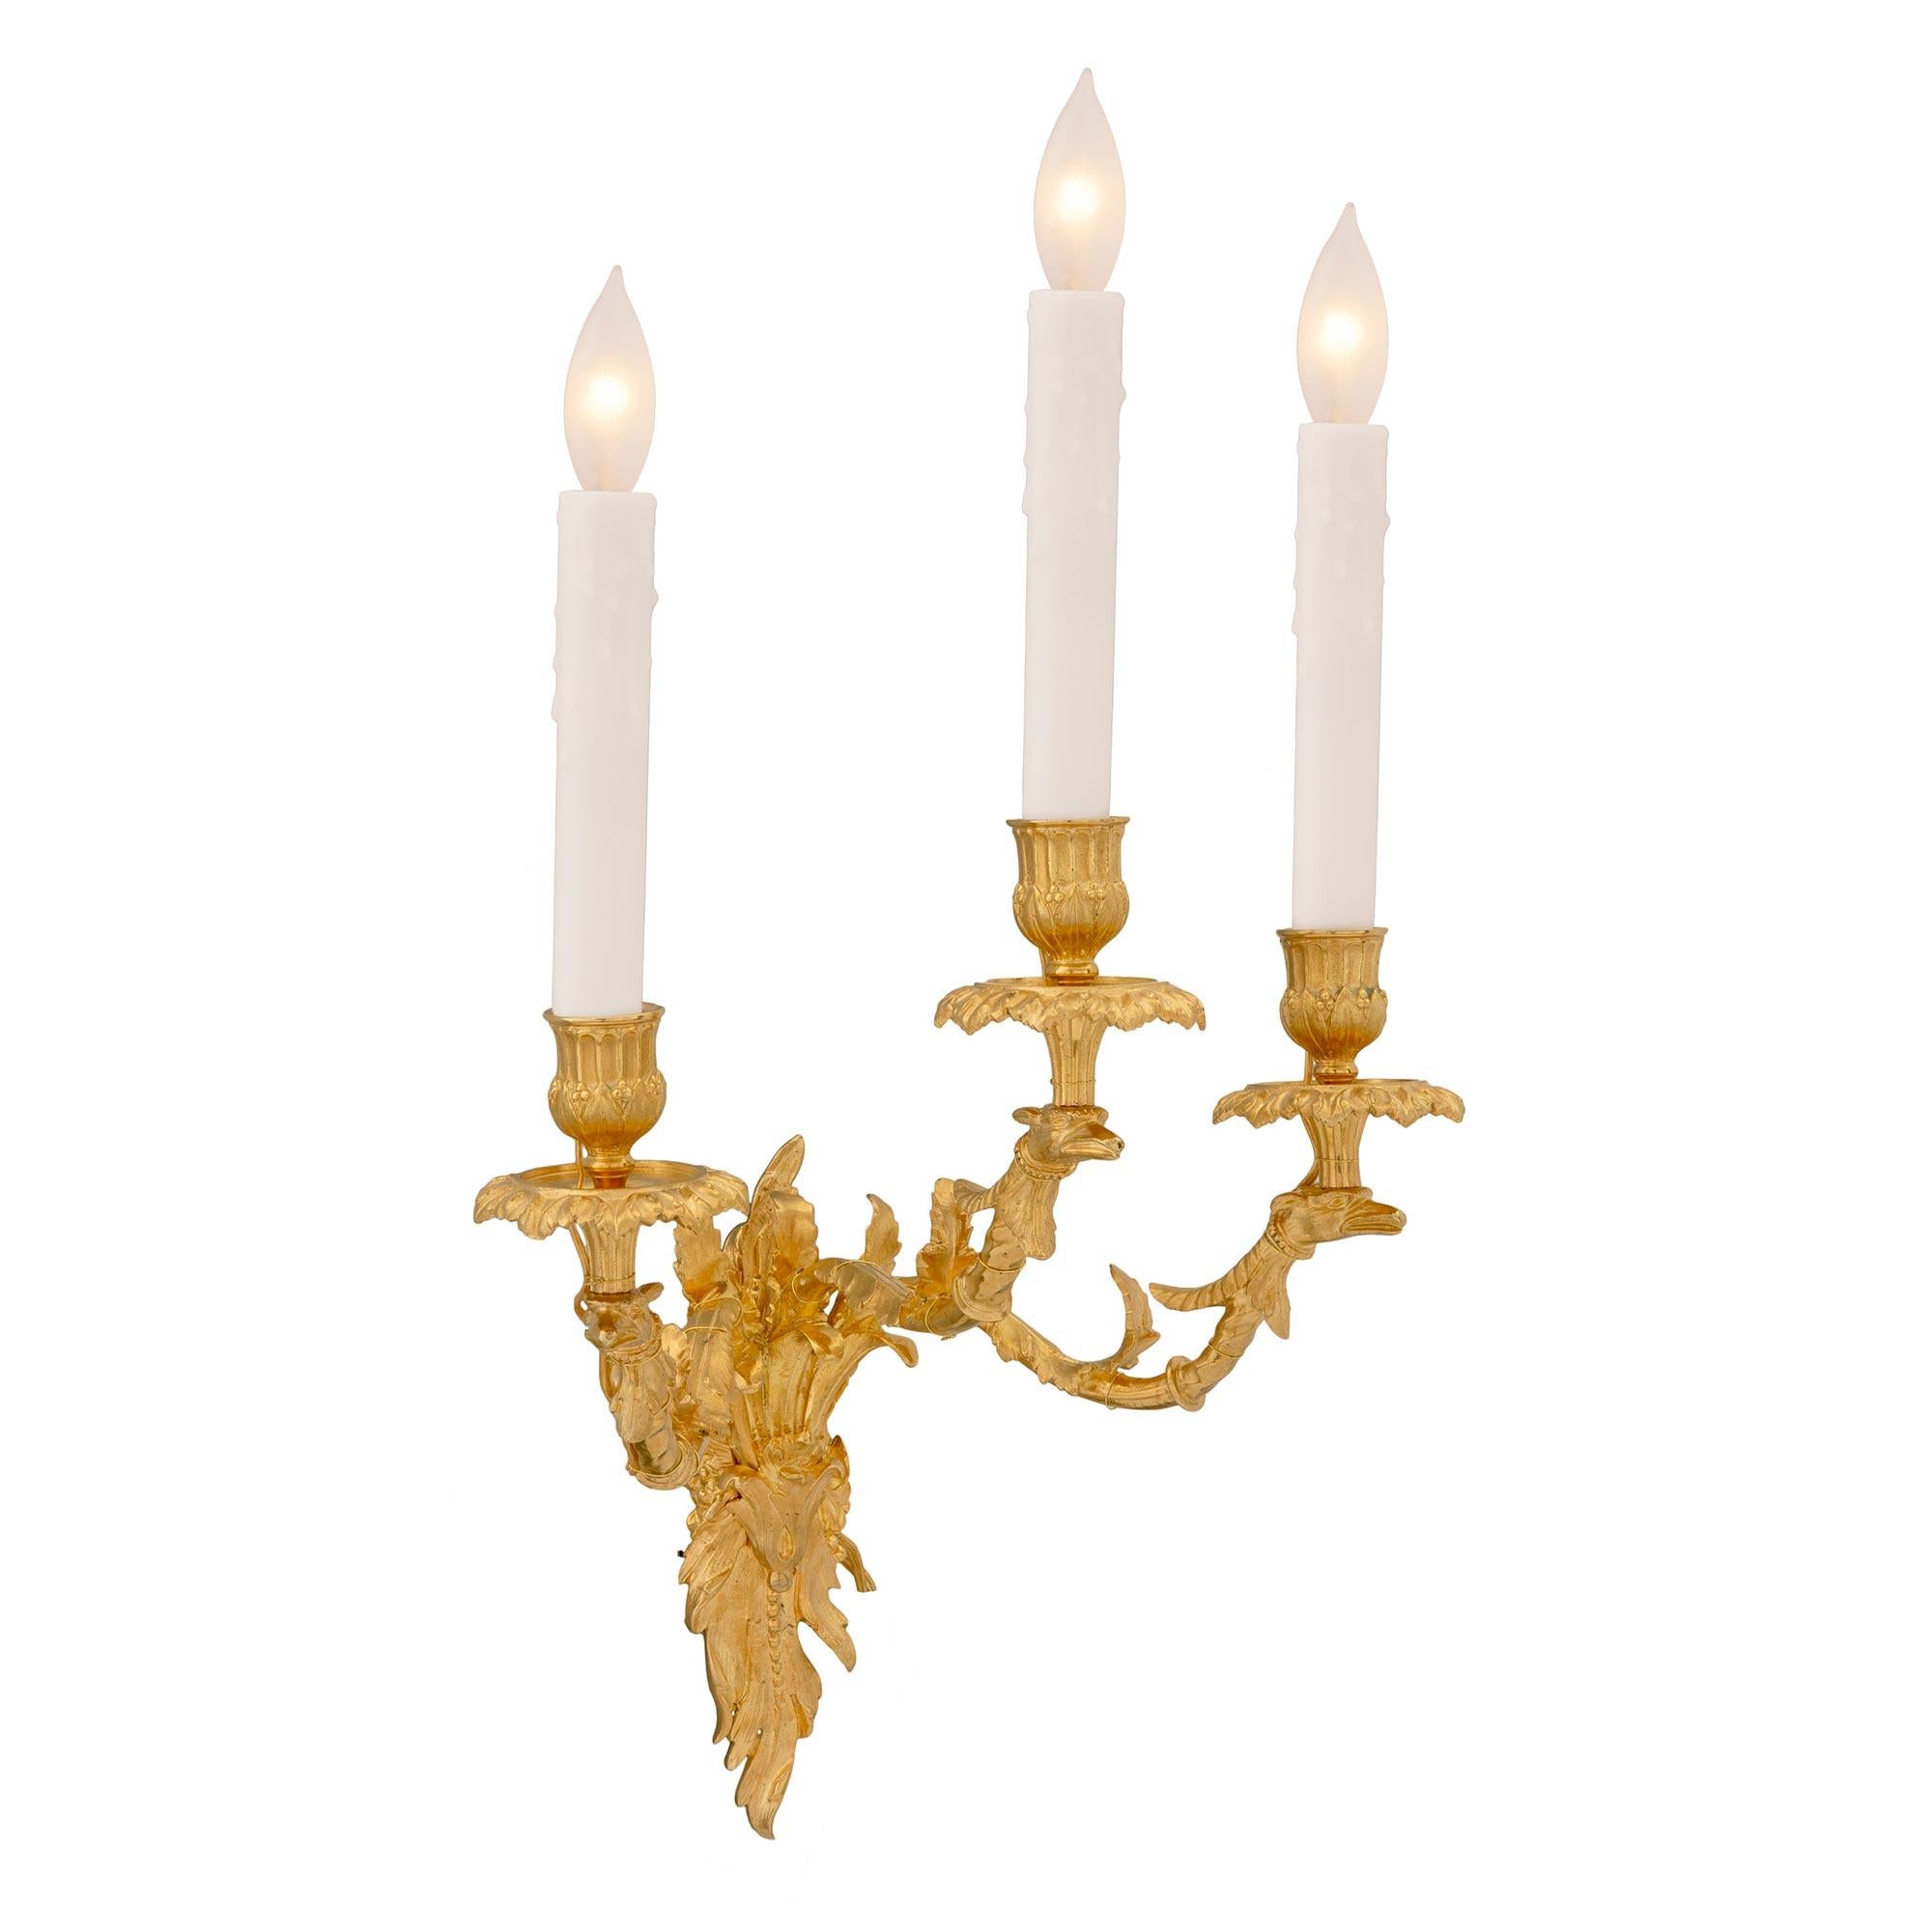 A lovely pair of French 19th century Louis XV st. ormolu three arm sconces. Each sconce displays a striking and richly chased foliate back plate with fine acanthus leaves. The elegantly scrolled arms also display wonderful foliate movements, most